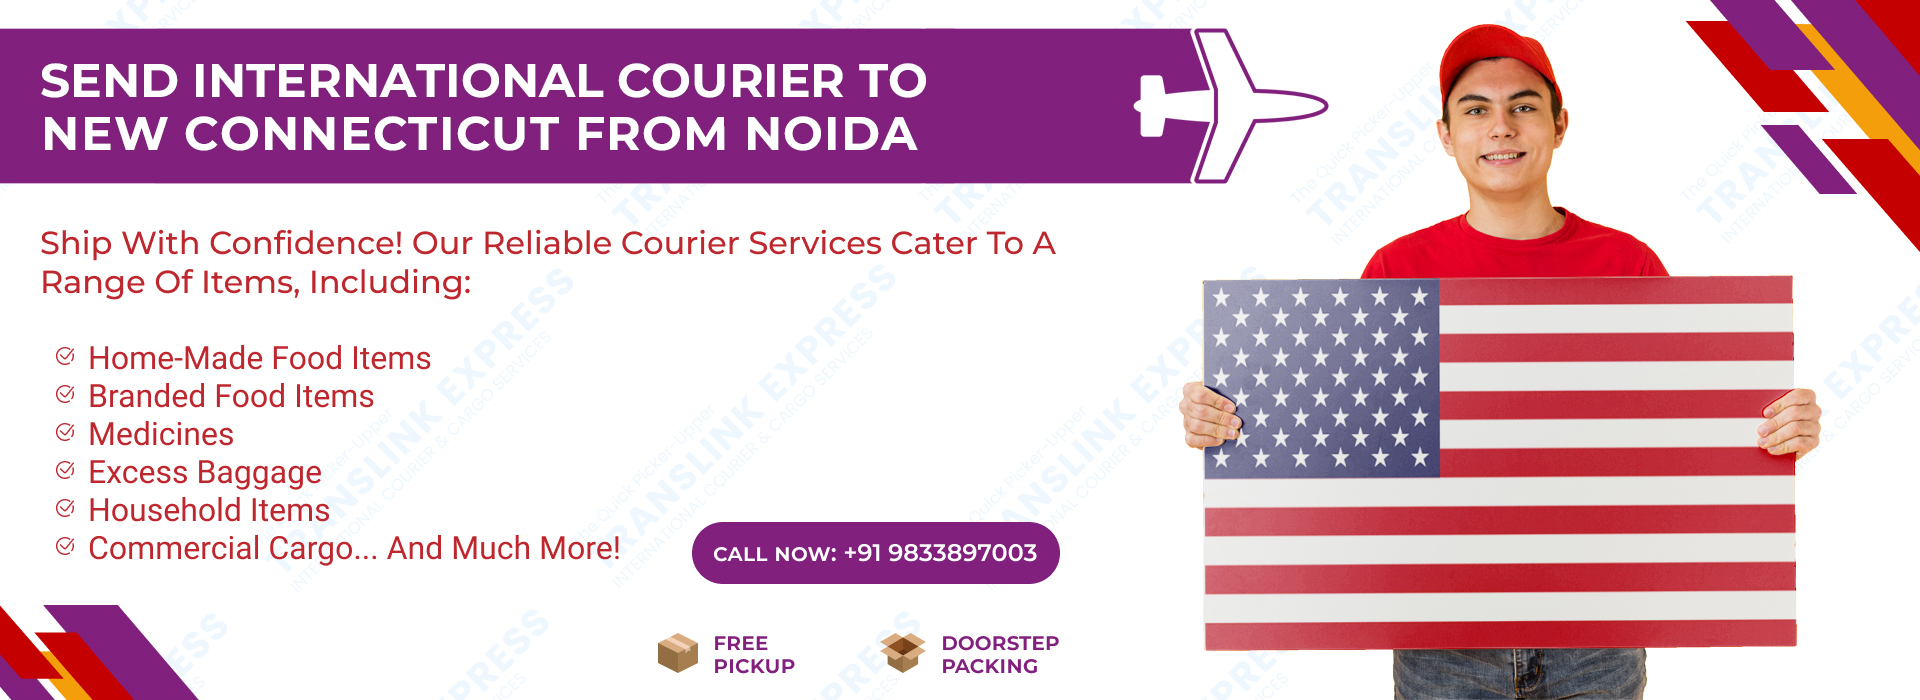 Courier to New Connecticut From Noida